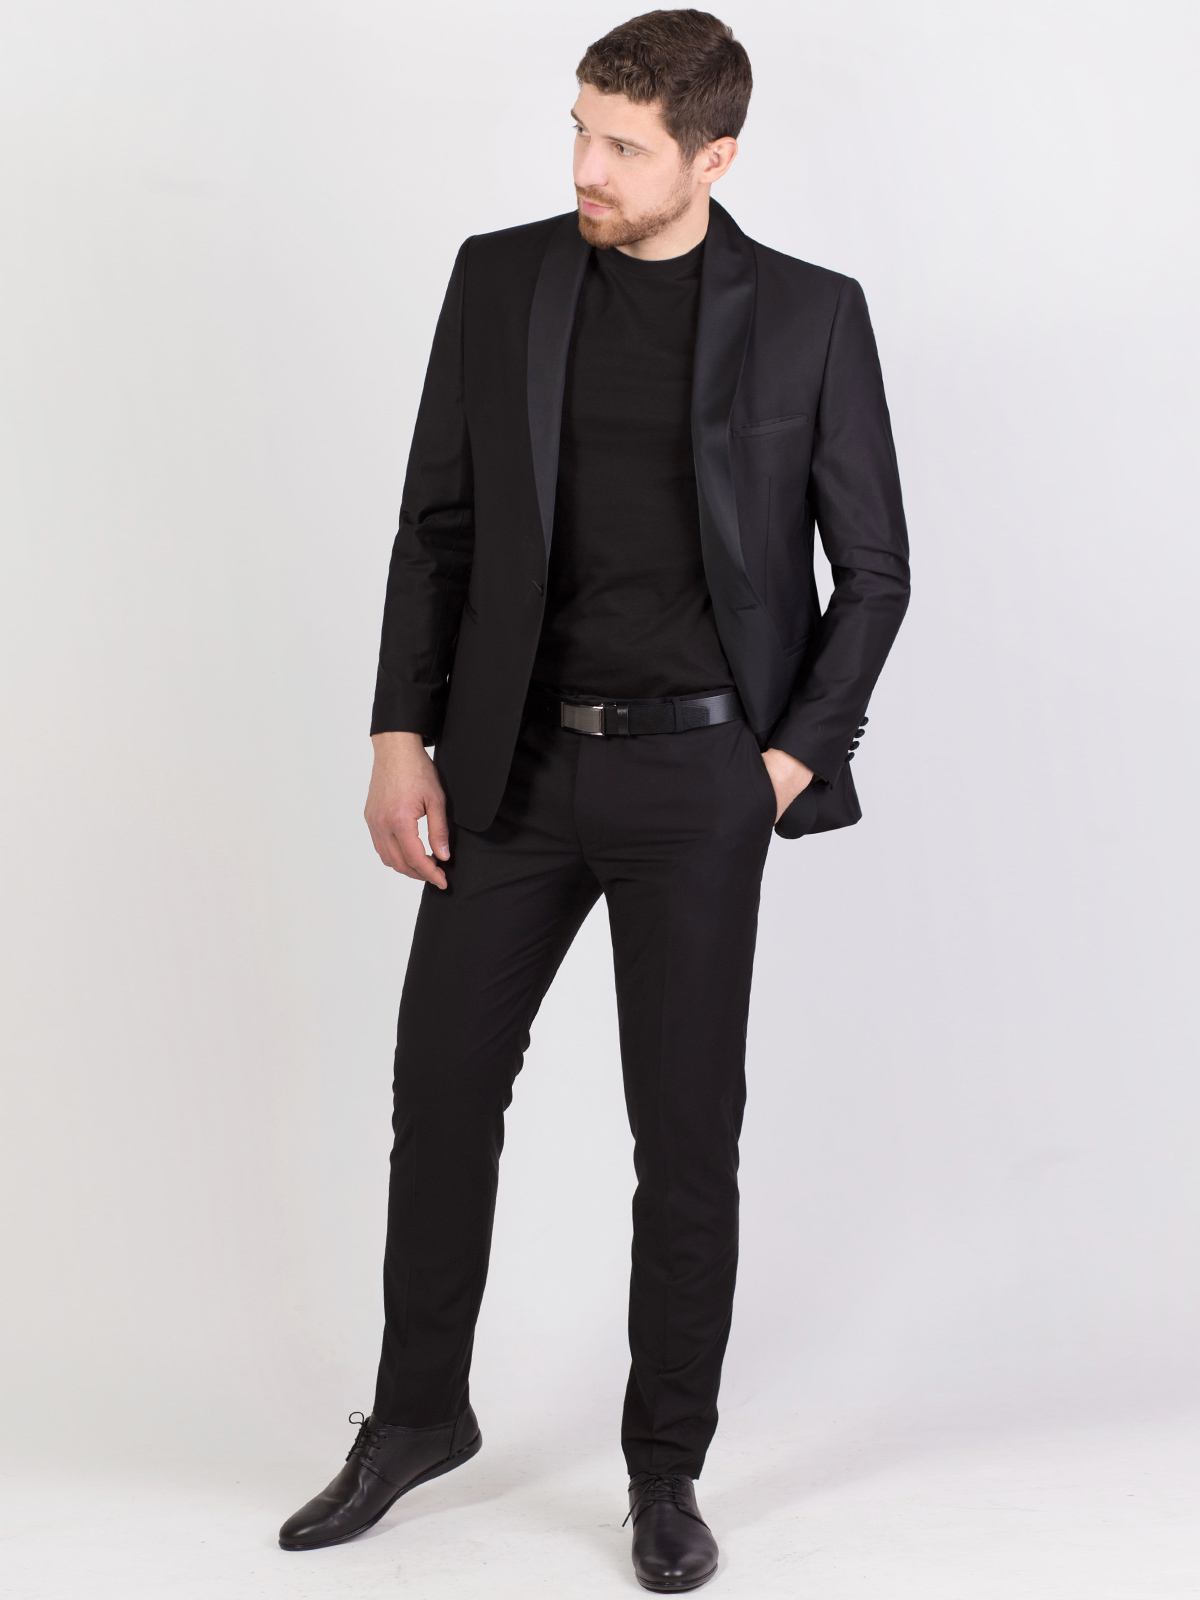  black suit with a satin collar scarf  - 68050 € 191.80 img3